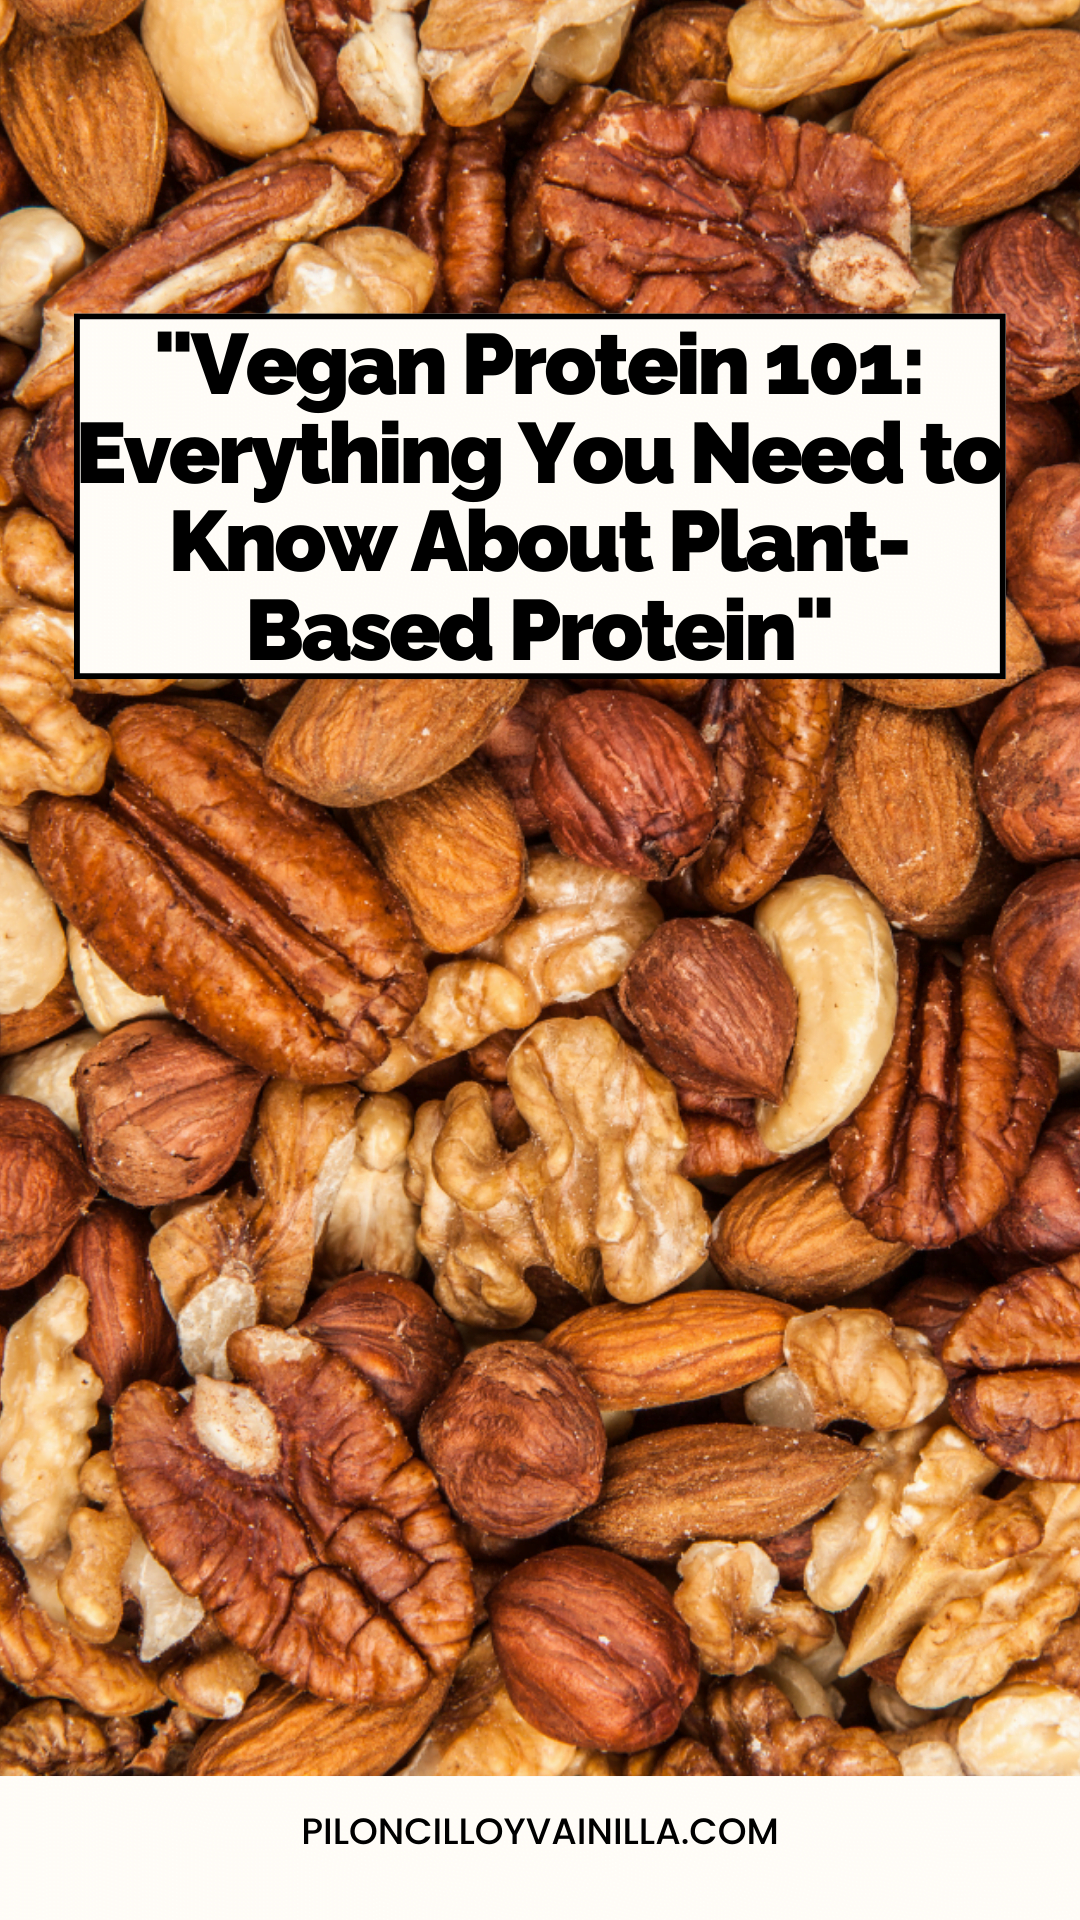 Best Vegan Sources and Recipes for Plant-Based Protein